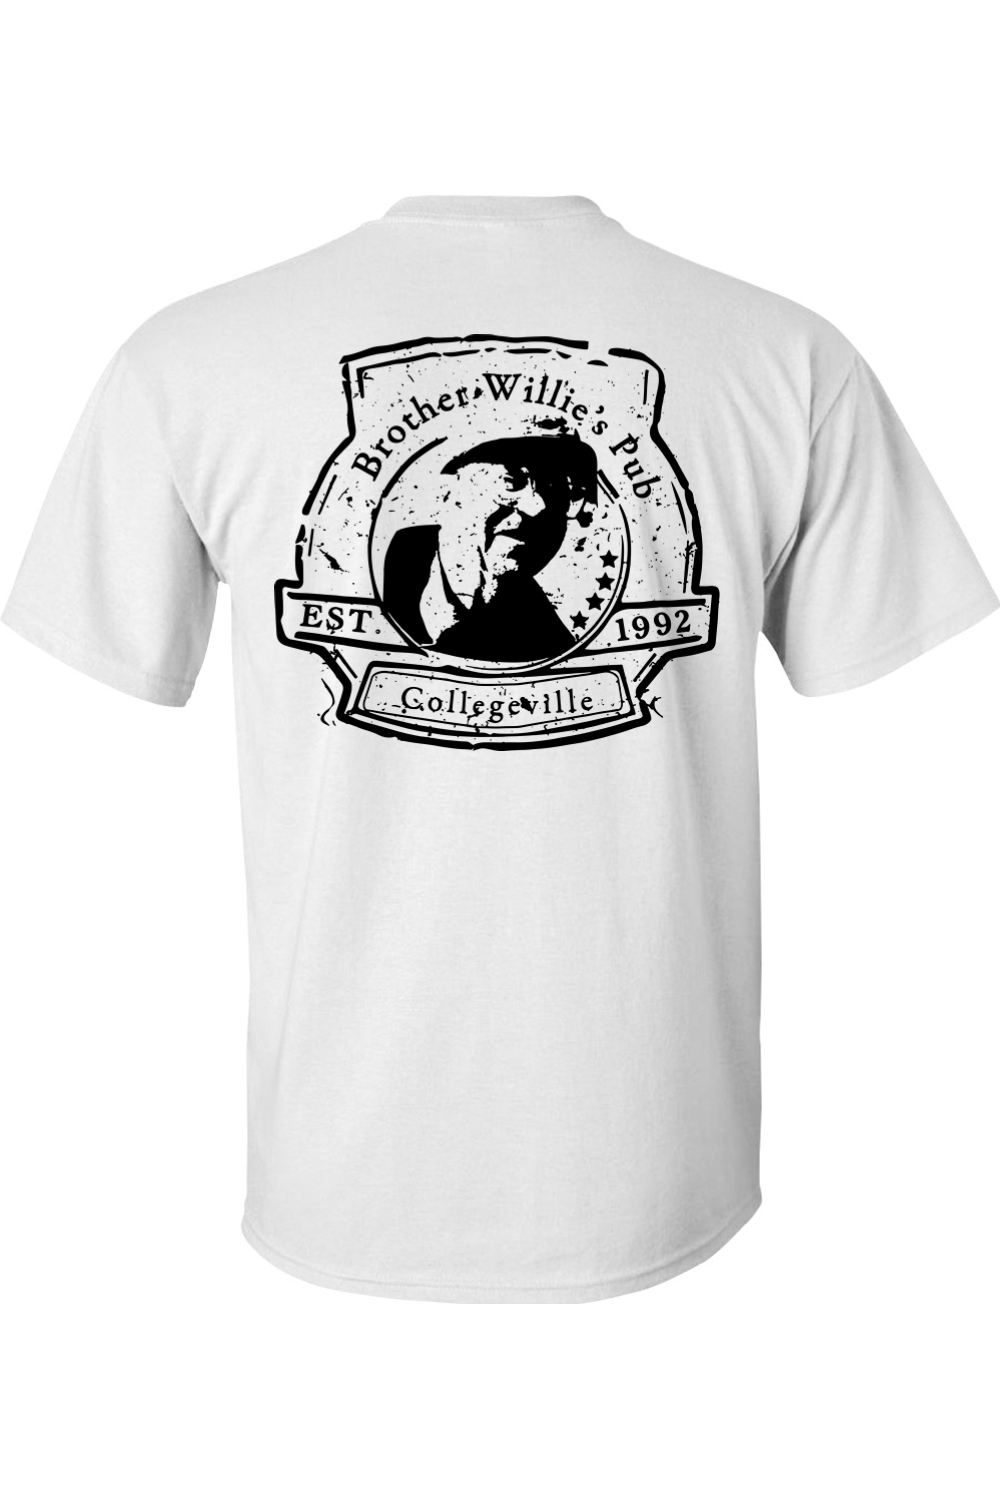 Brother Willie's Pub T-Shirt